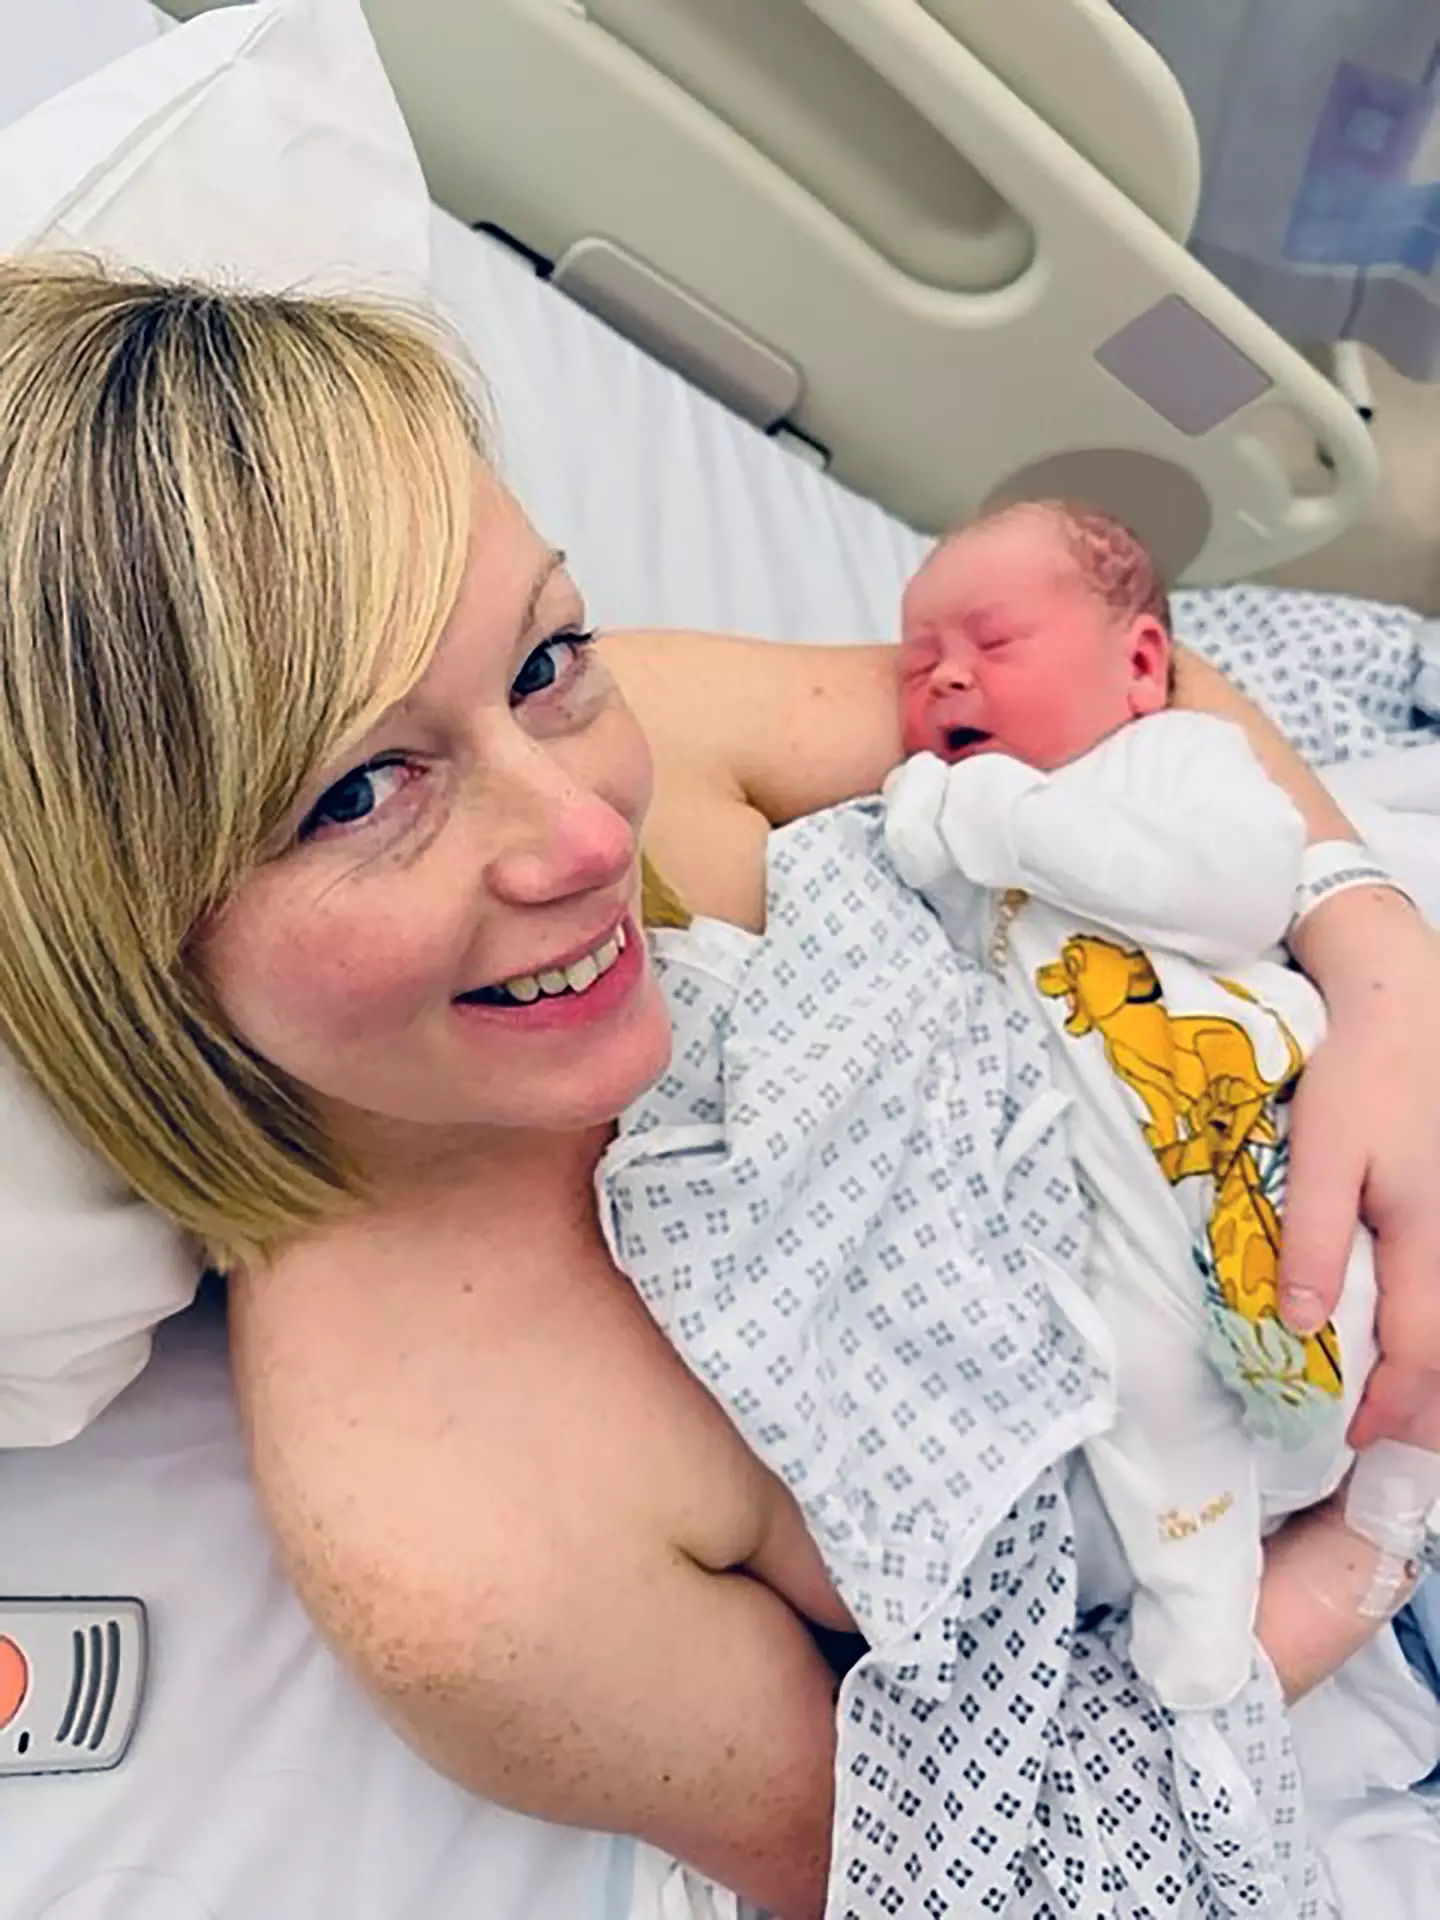 Stacey was able to have a 'miracle baby' after being diagnosed with a rare cancer.